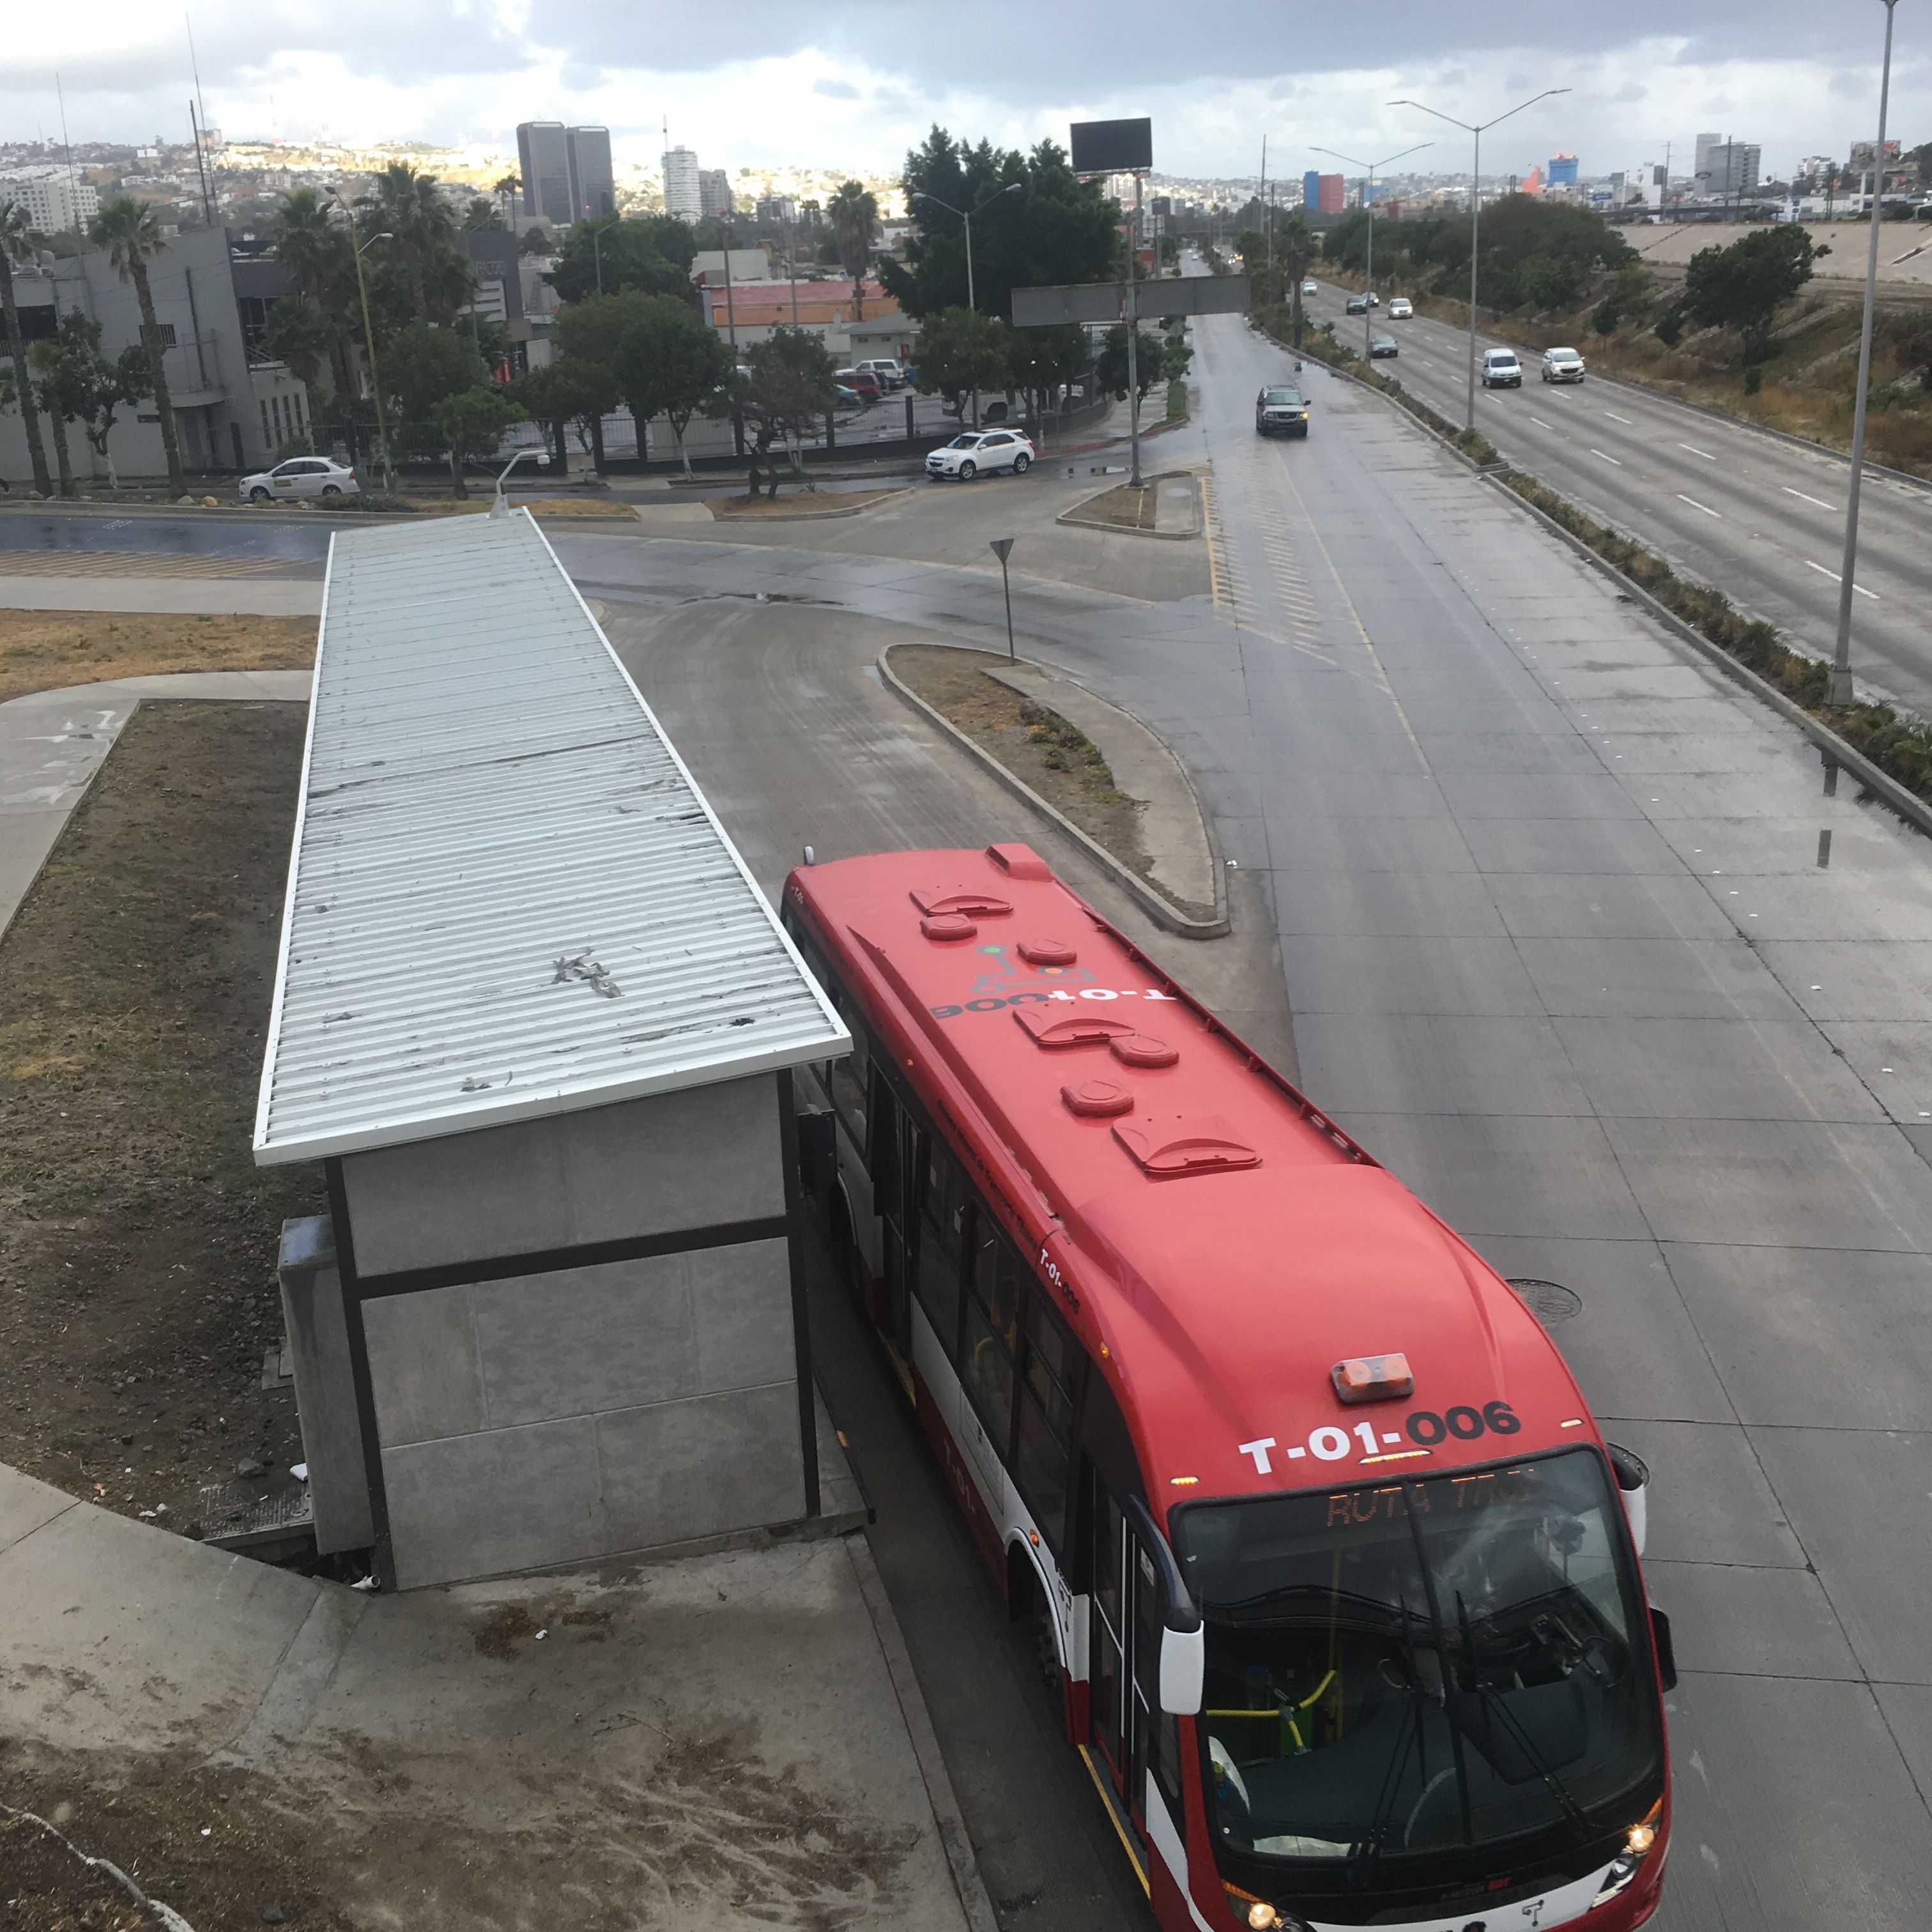 A SITT ruta troncal bus pulls out of its station on the Avenida Vía Rápida. Image by Patrick Reilly. Mexico, 2017.